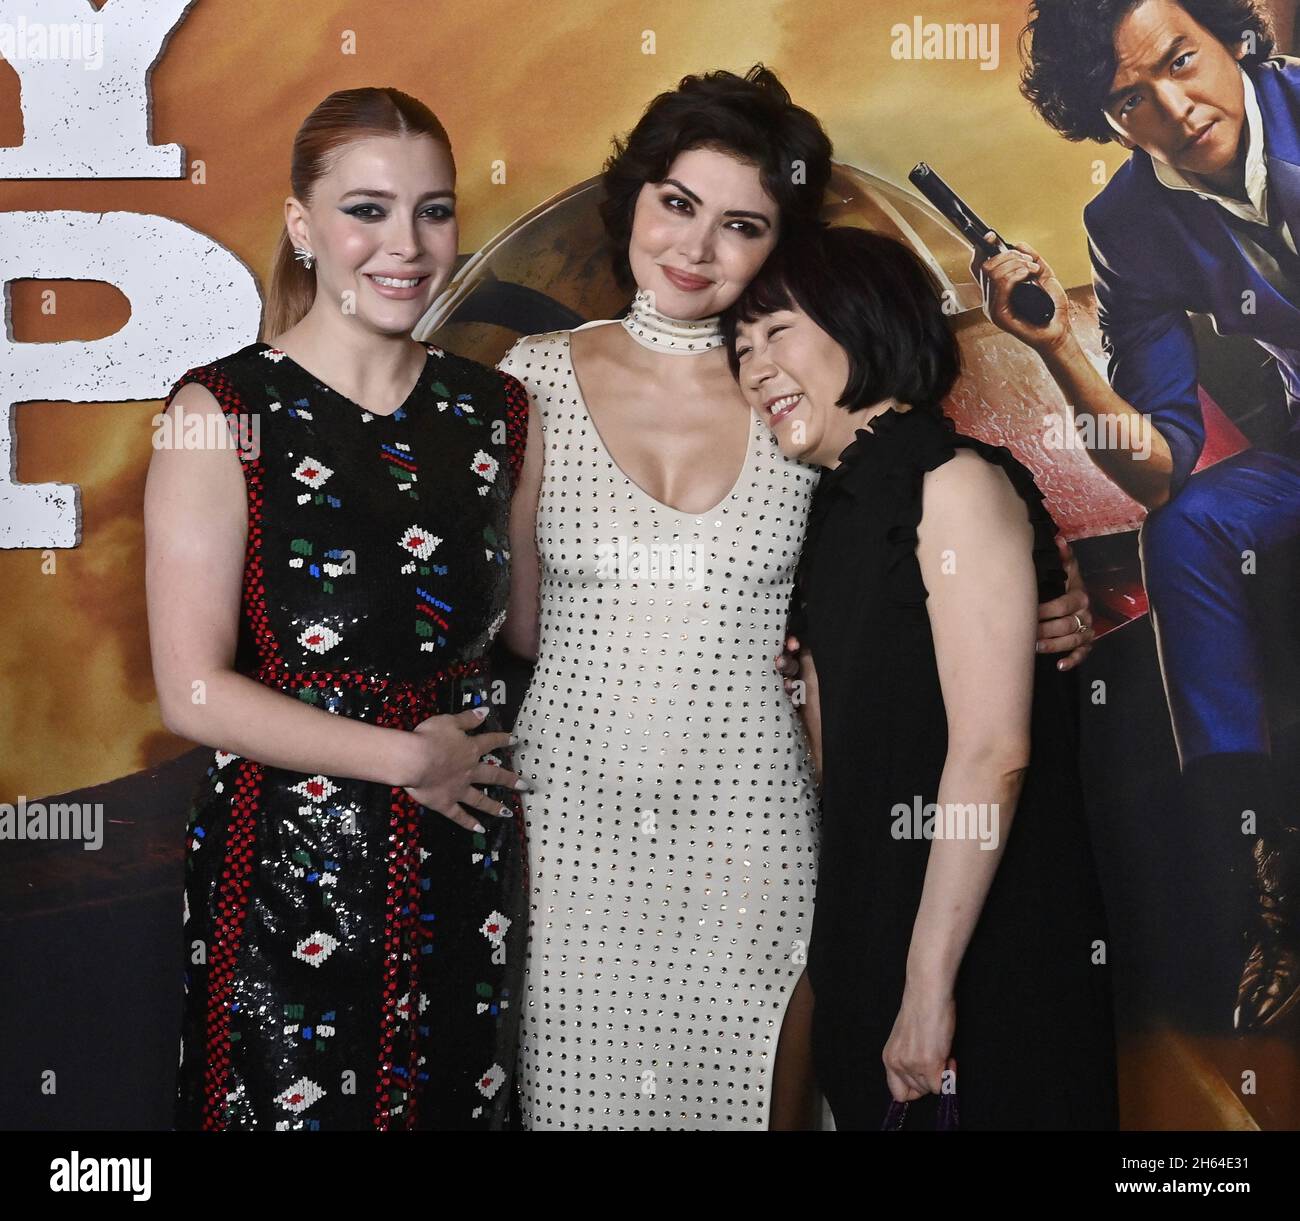 Los Angeles, USA. 12th Nov, 2021. Cast members Elena Satine, Daniella Pineda and Yoko Kanno (L-R) attend the premiere of Netflix's sci-fi crime drama TV series 'Cowboy Bebop' at Goya Studios in the Hollywood section of Los Angeles on Thursday, November 11, 2021. Storyline: A ragtag crew of bounty hunters chases down the galaxy's most dangerous criminals. They'll save the world - for the right price. Photo by Jim Ruymen/UPI Credit: UPI/Alamy Live News Stock Photo